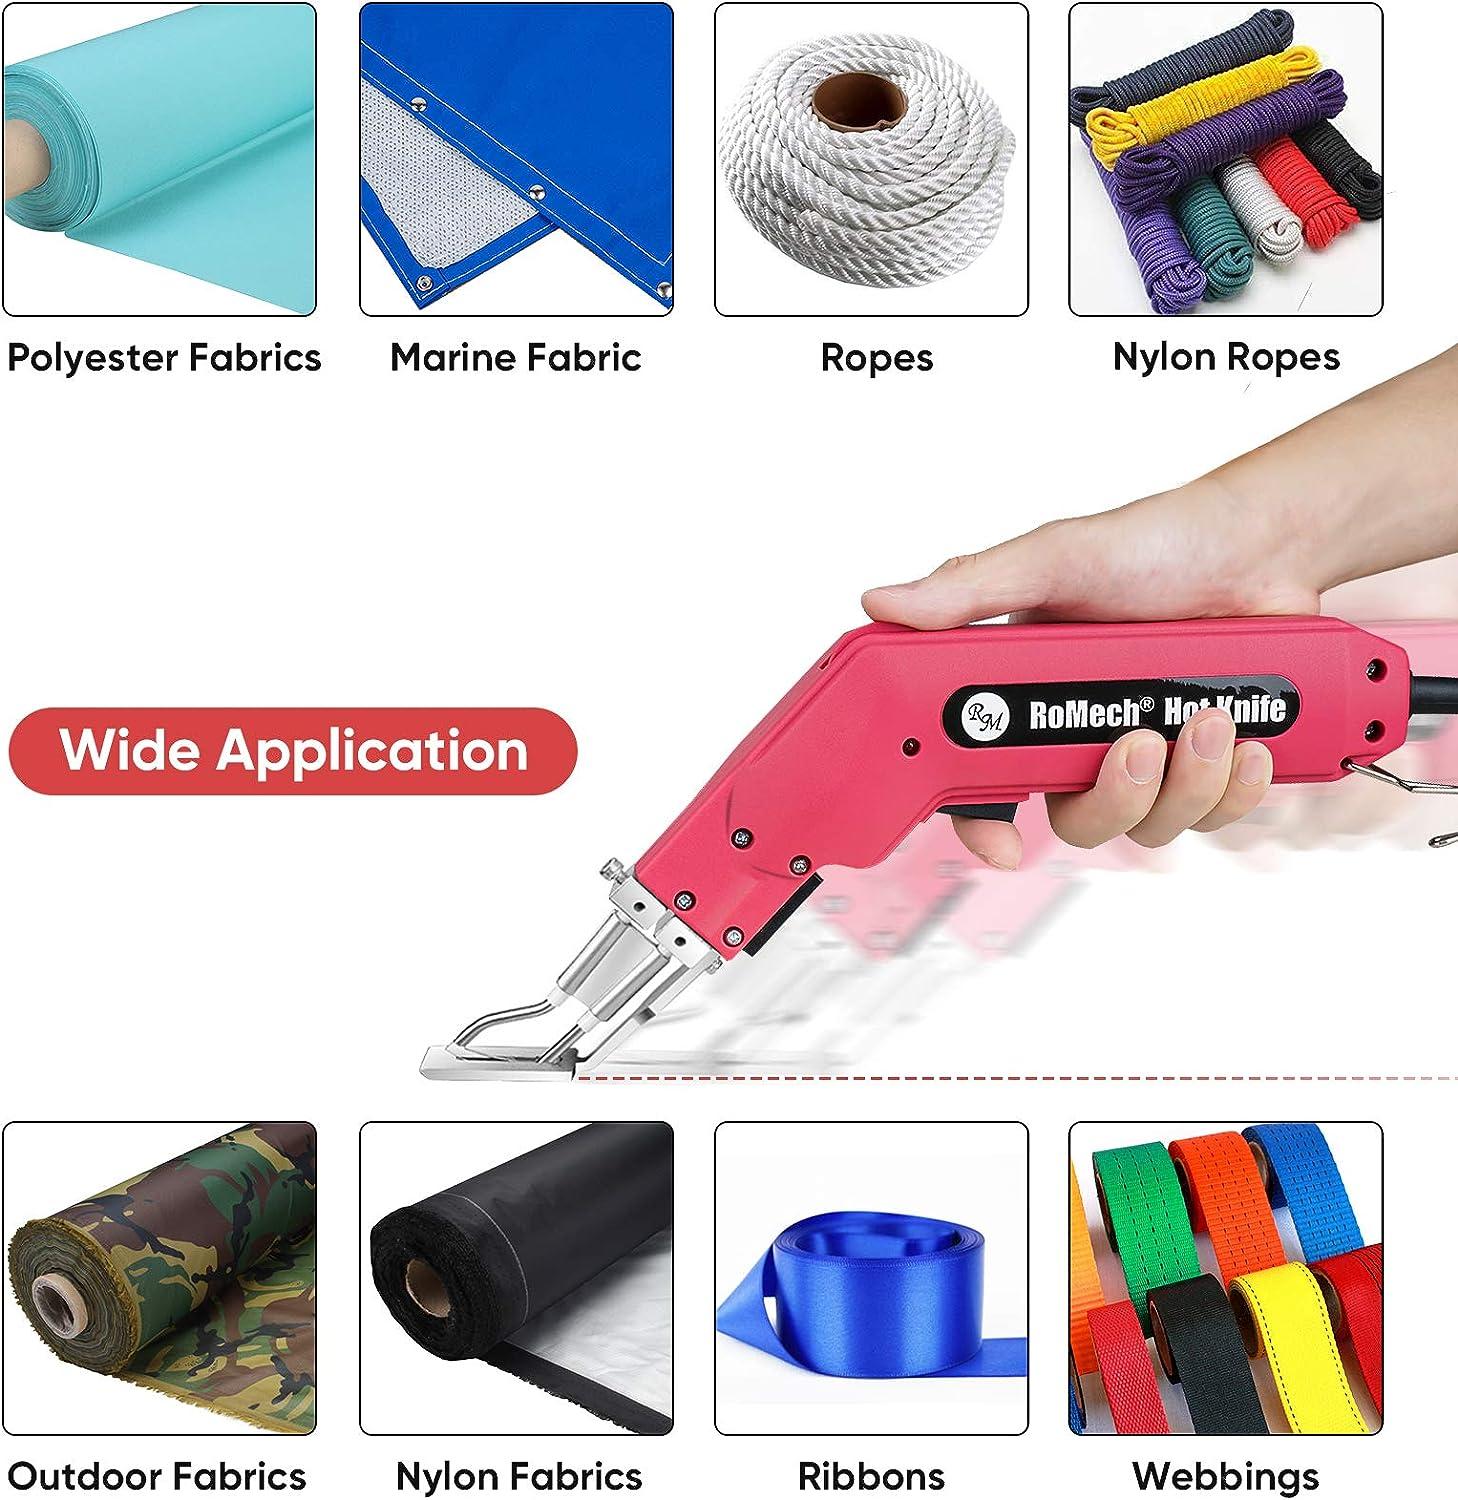 Hot Fabric Cutter for Cloth/Synthetic Materials + Tough Materials like